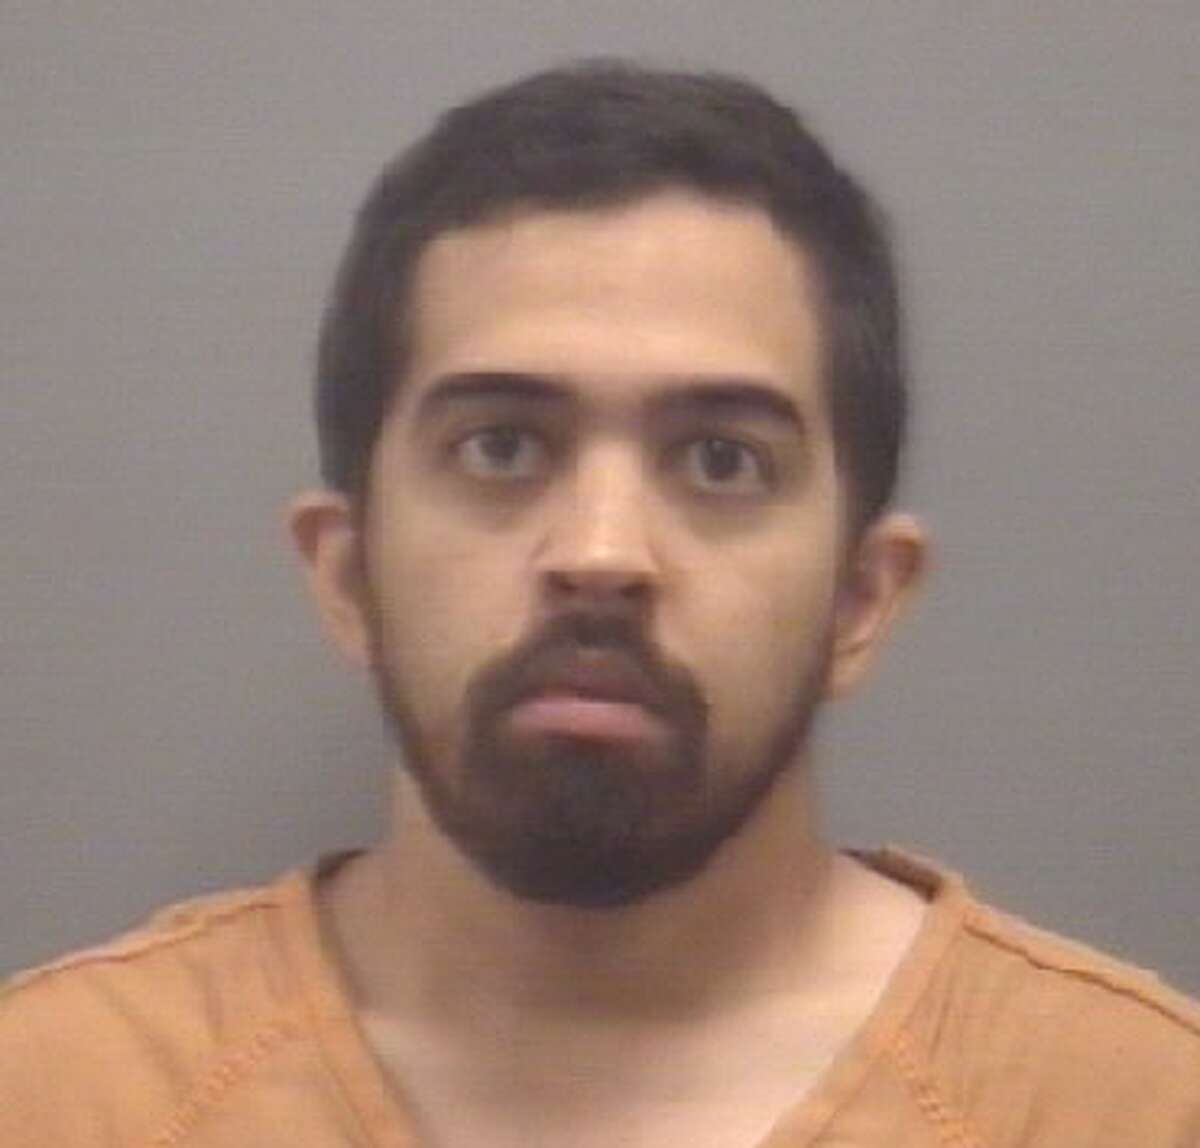 Justin Michael Devera, 32, a former teacher at Dickinson High School, turned himself in to League City police on April 18, 2017 and was booked on the charge of Improper Relationship Between Educator/Student.  